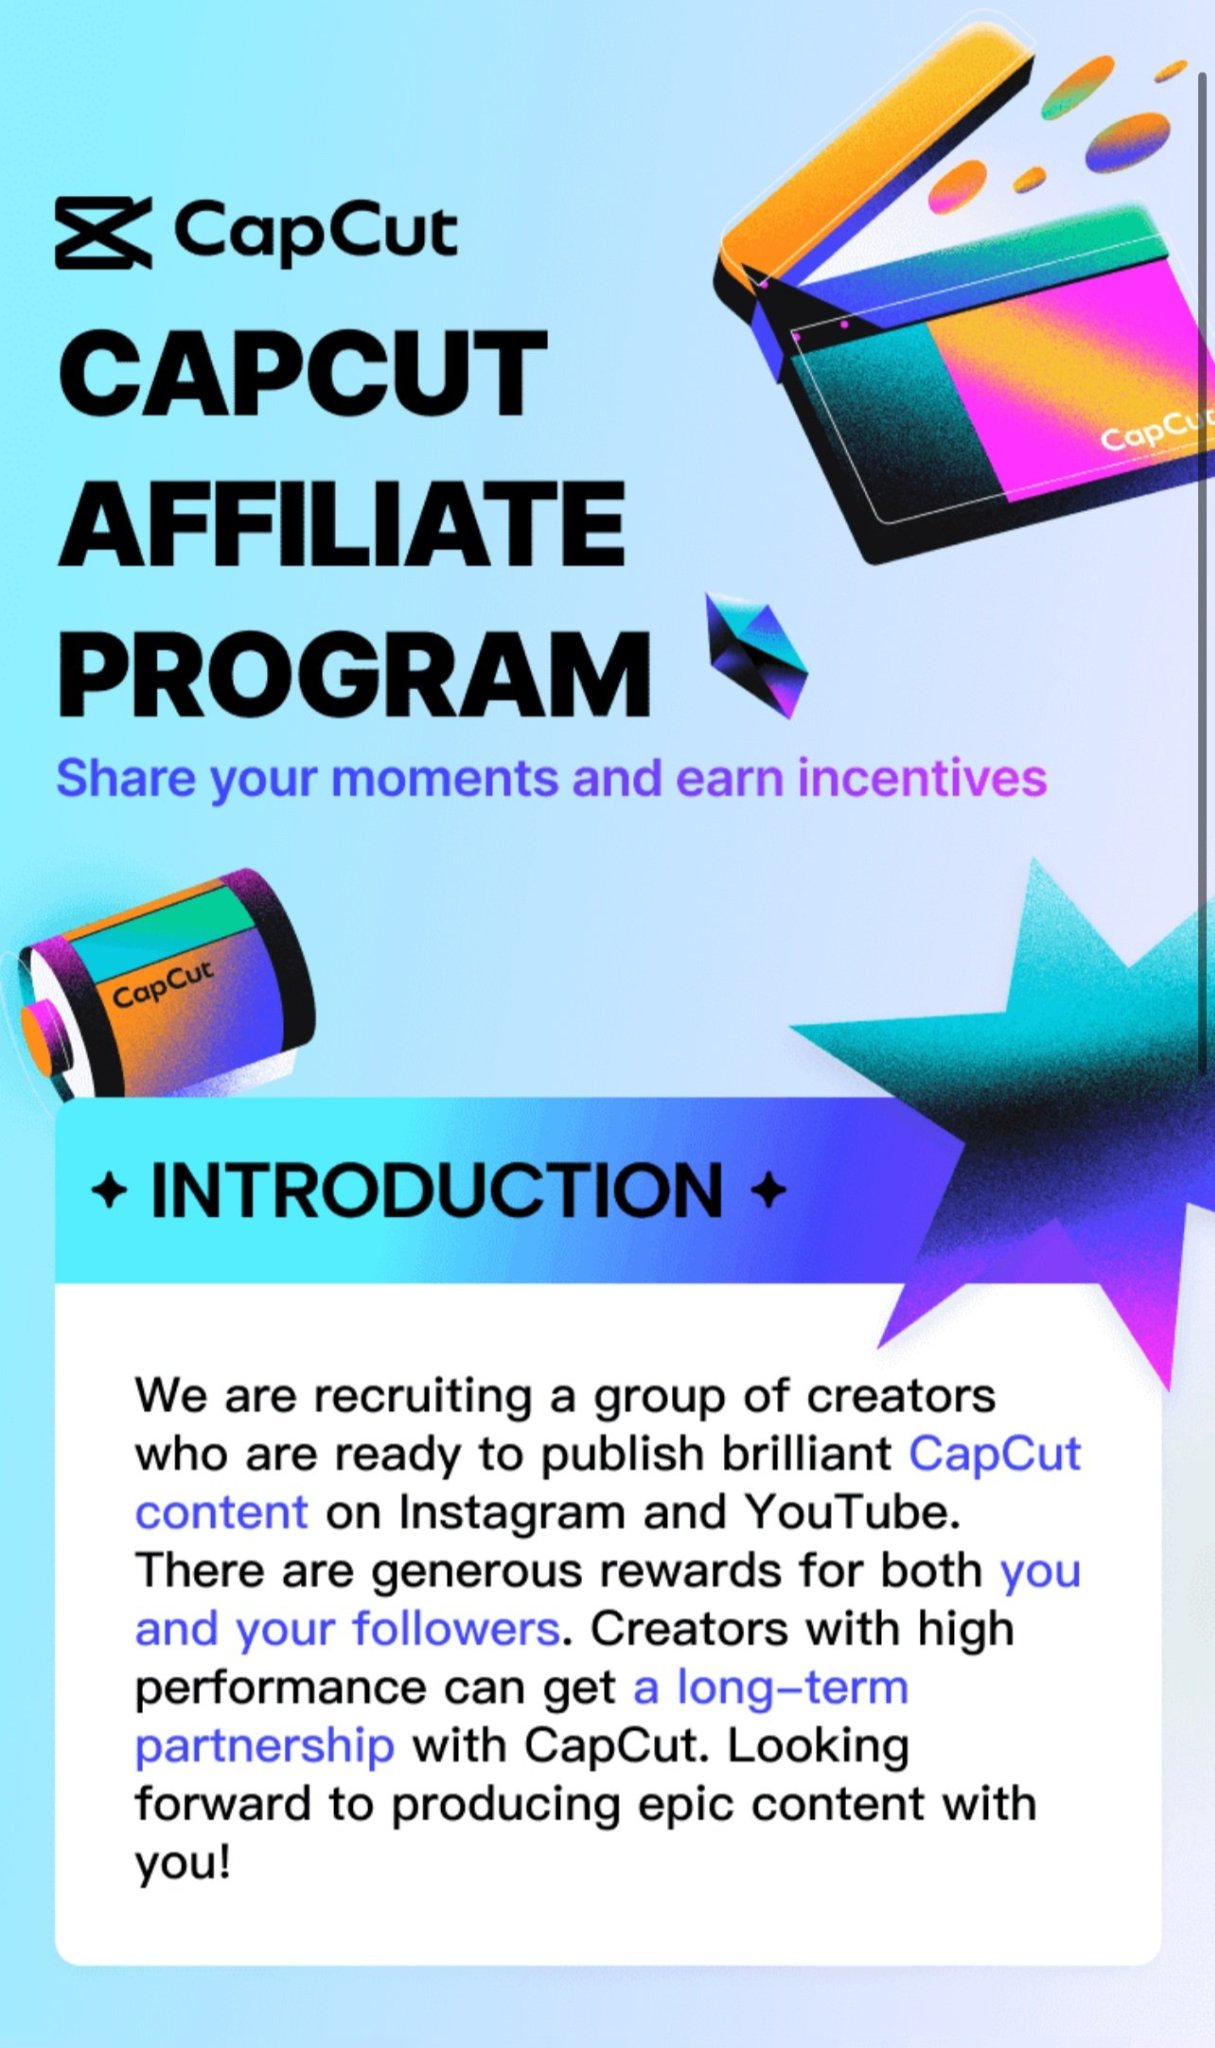 ByteDance-Owned Editing App CapCut Launches an Affiliate Program for Instagram and YouTube Creators